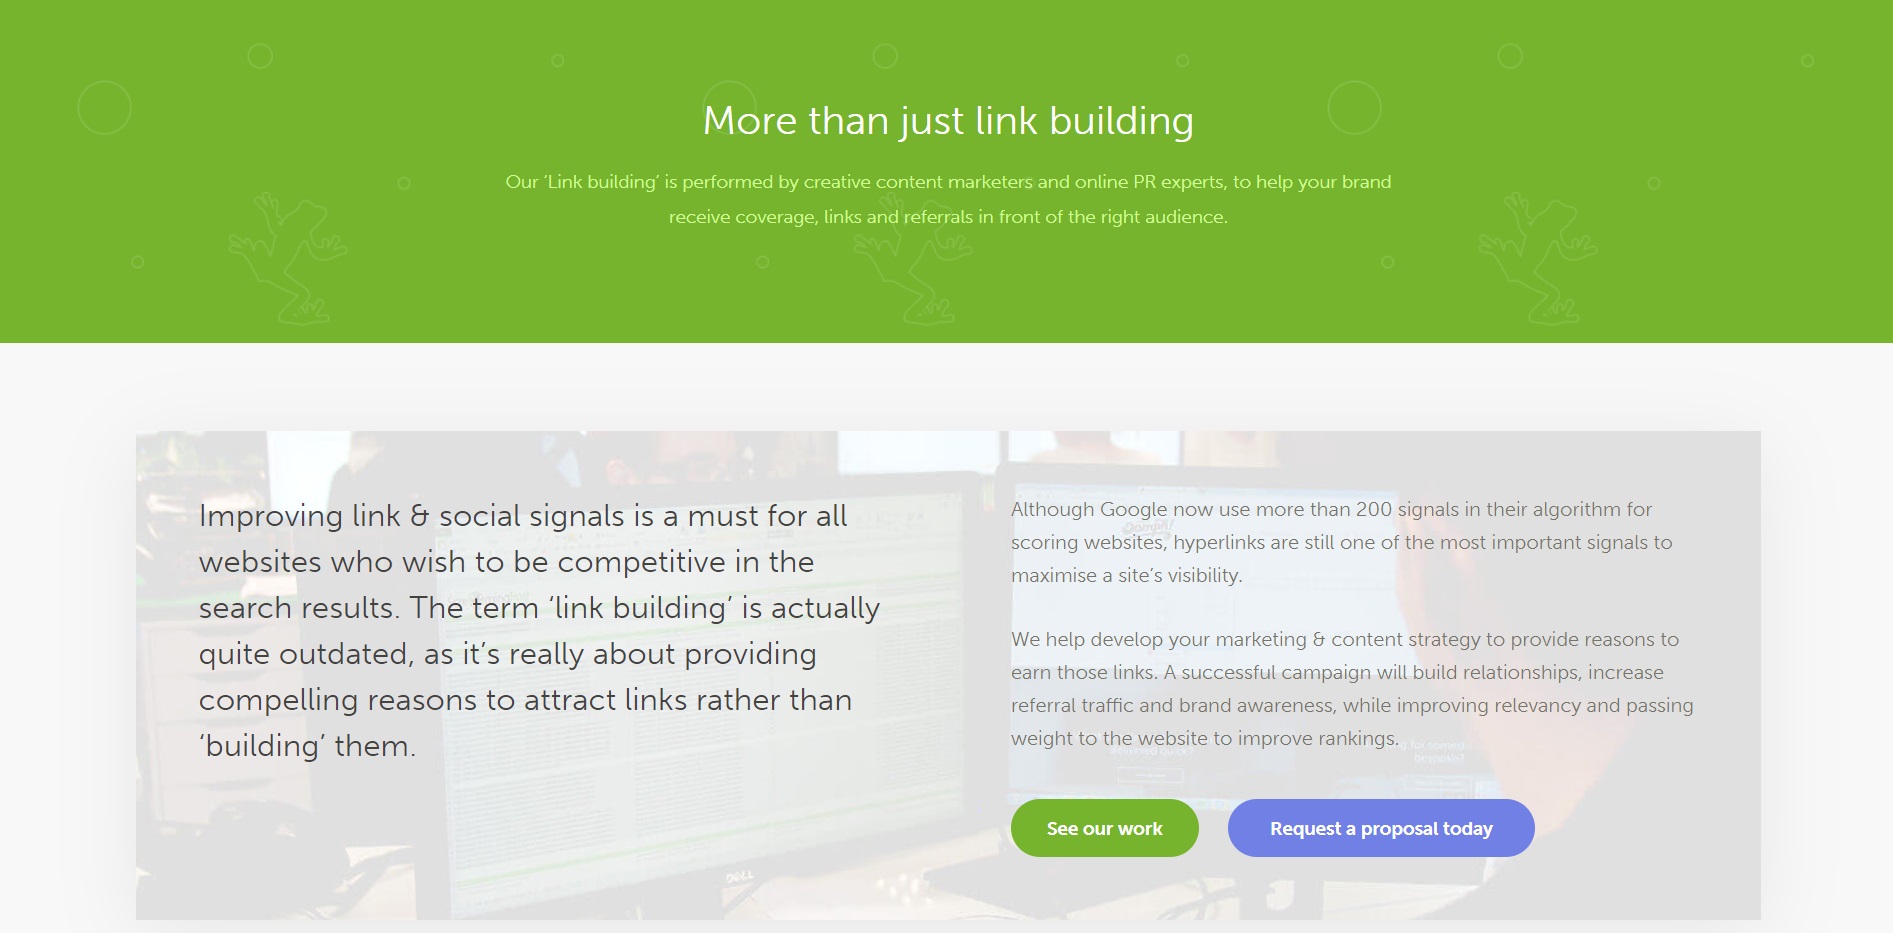 Link Building services by Screaming Frog 